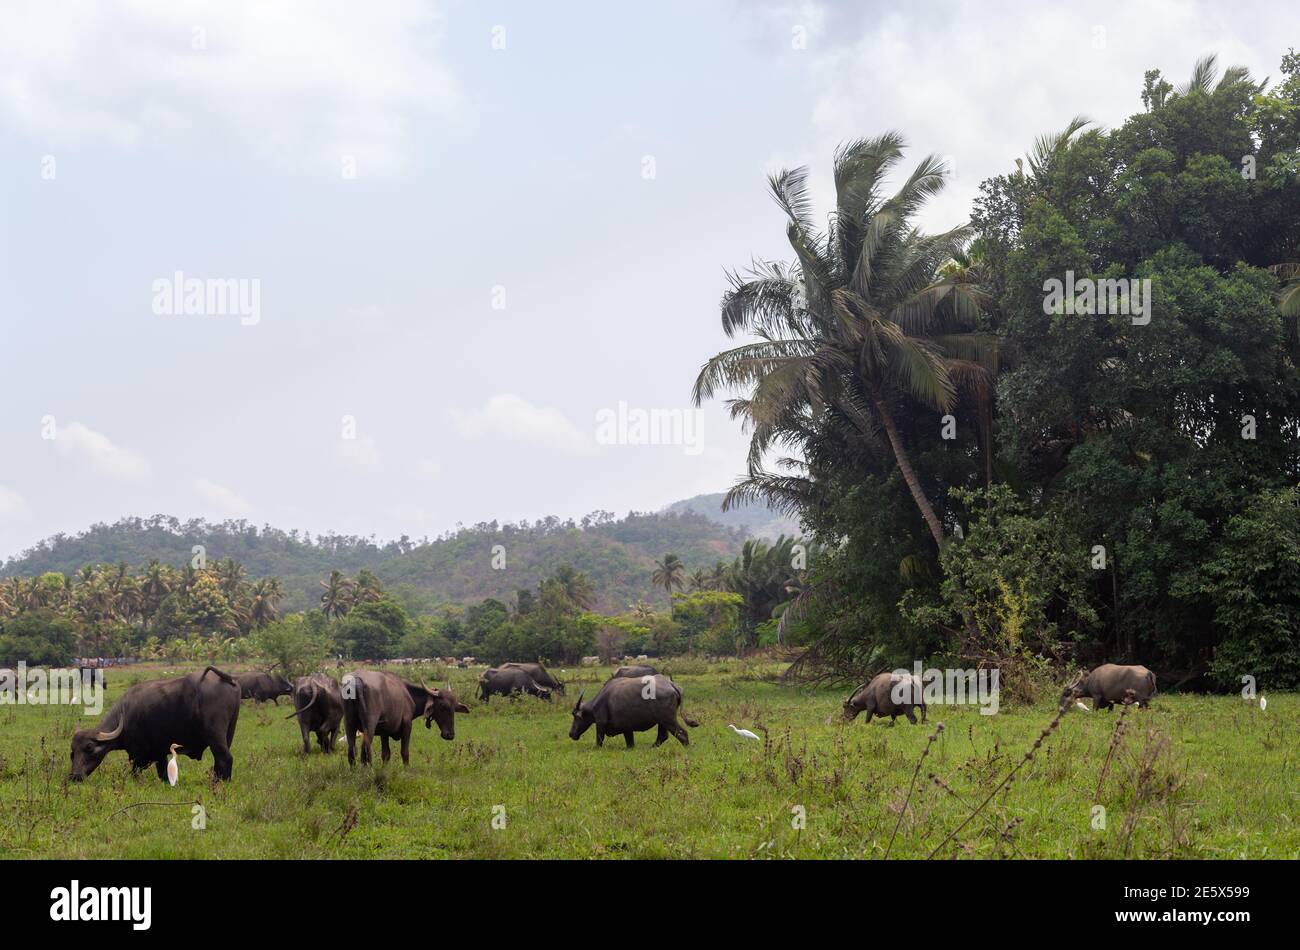 A view of a field in south India with buffalos and palm trees Stock Photo